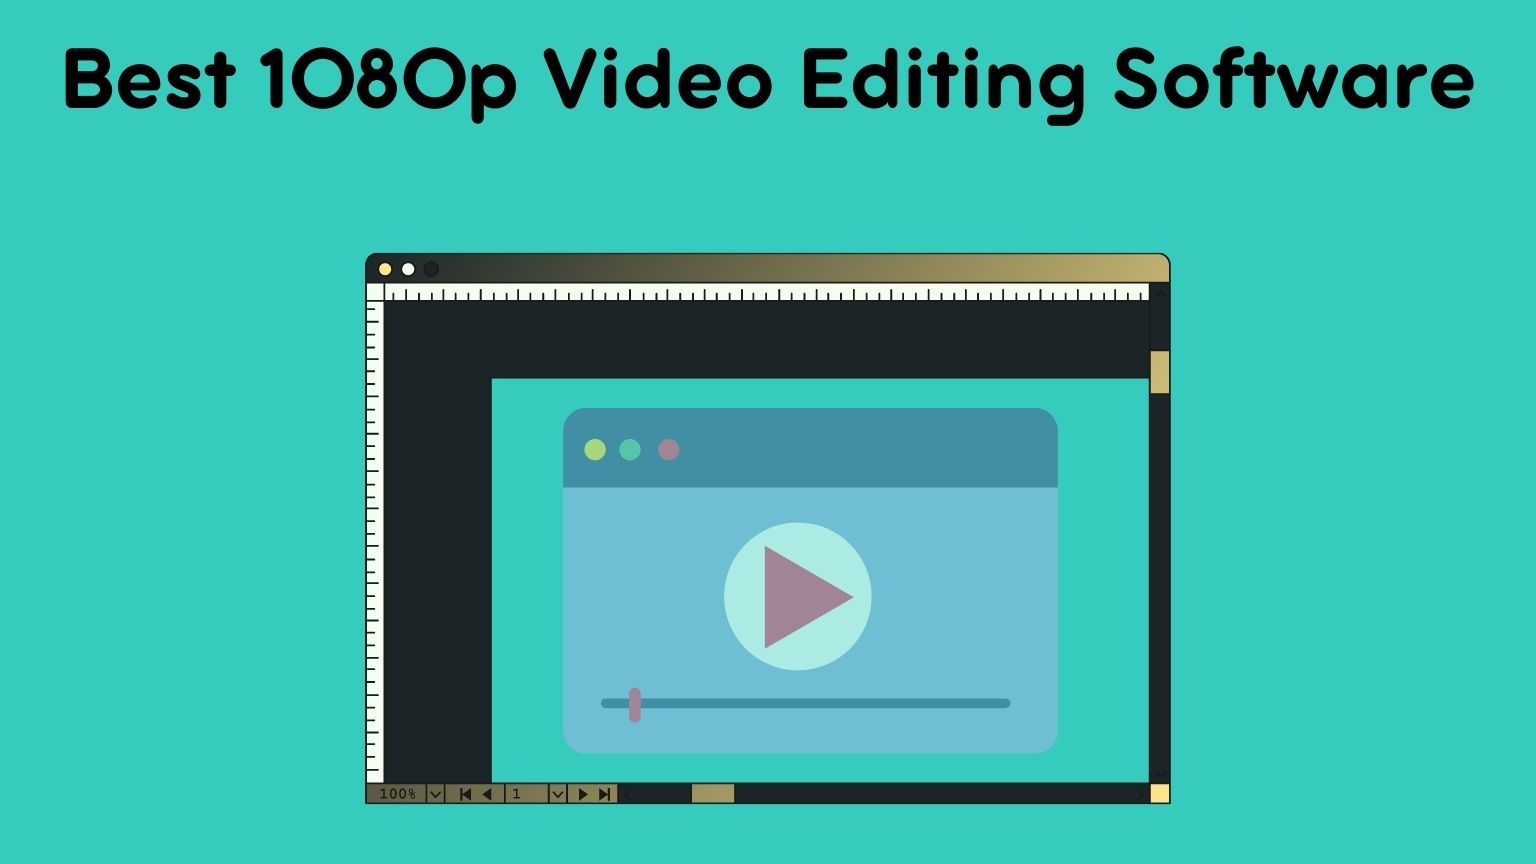 Best 1080p Video Editing Software